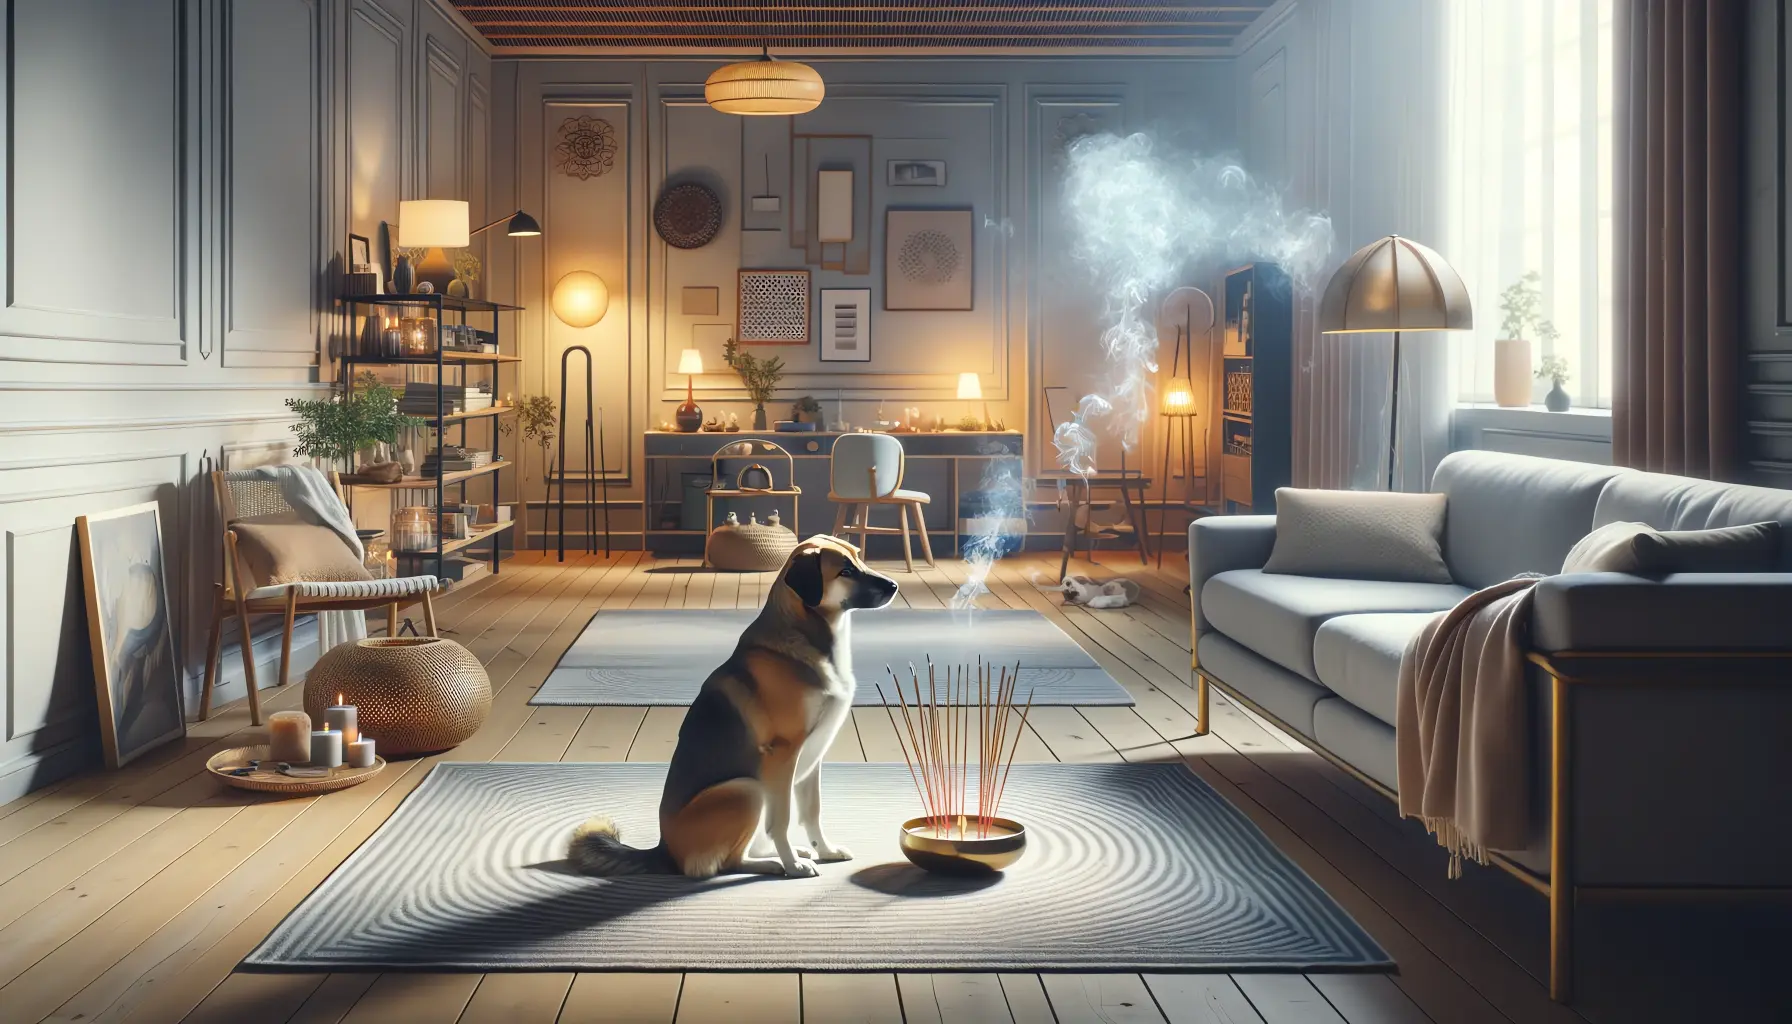 A dog sitting peacefully in a room with incense burning, reflecting the article's focus on canine health and incense safety